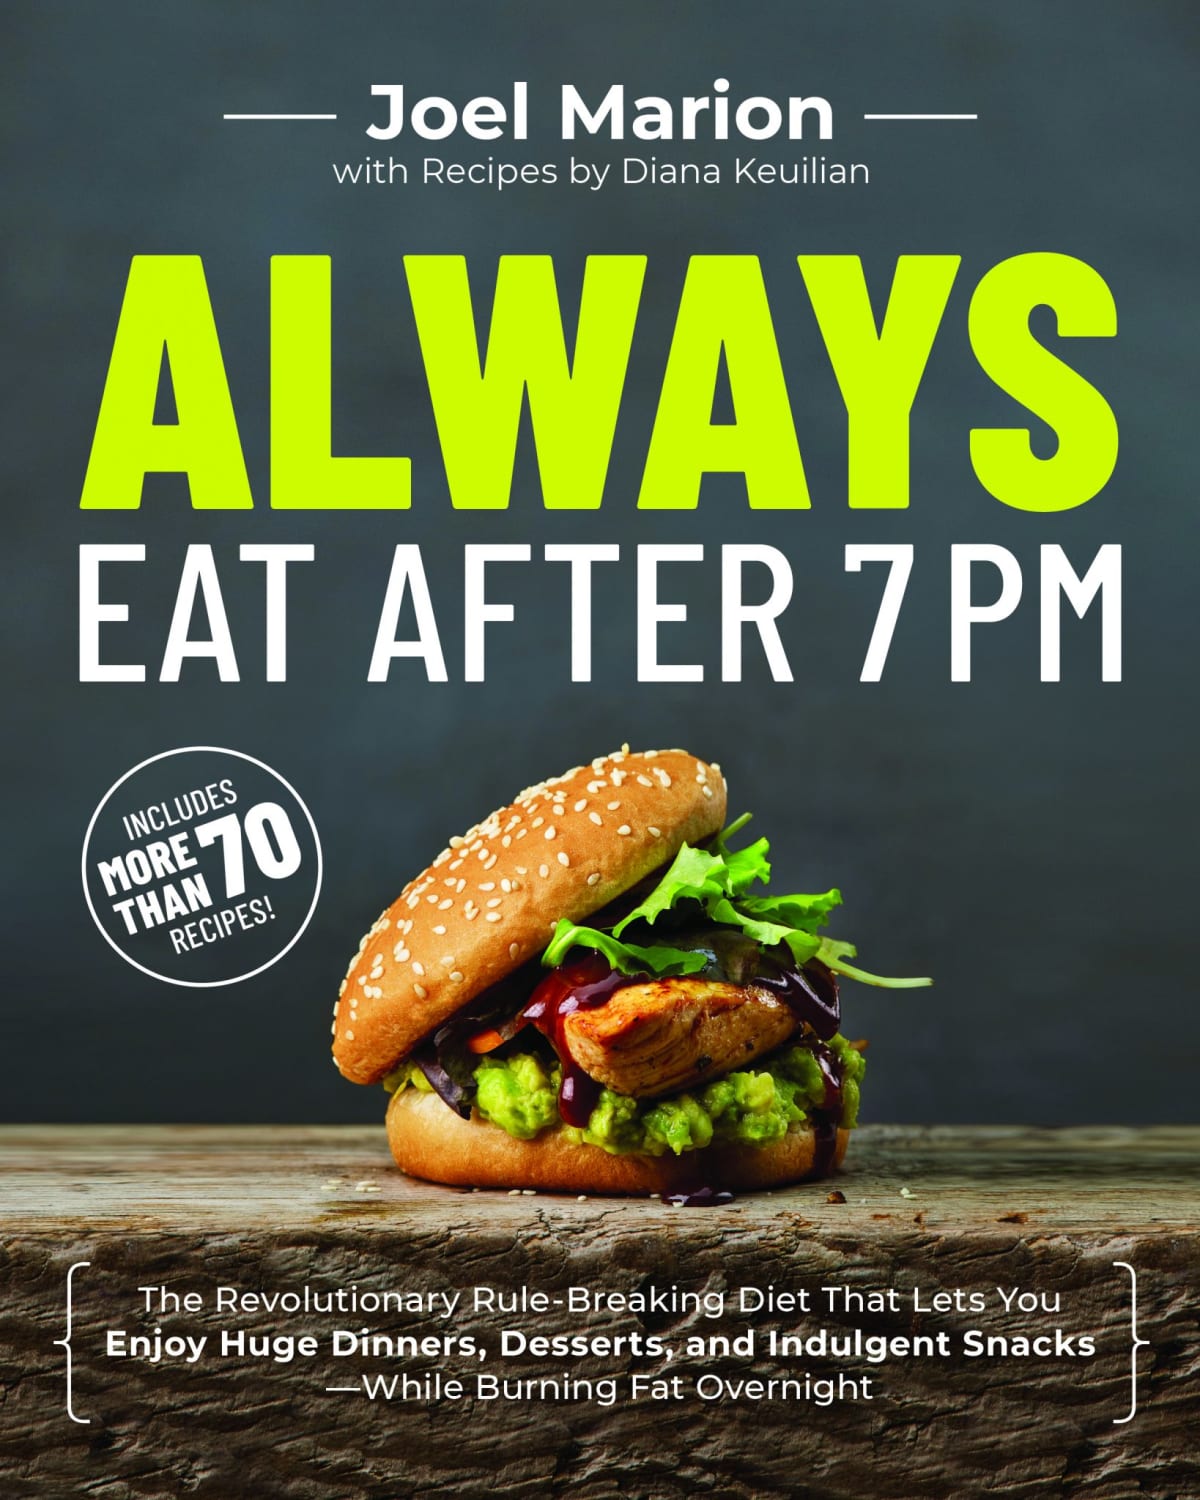 Final Thoughts on Always Eat After 7PM